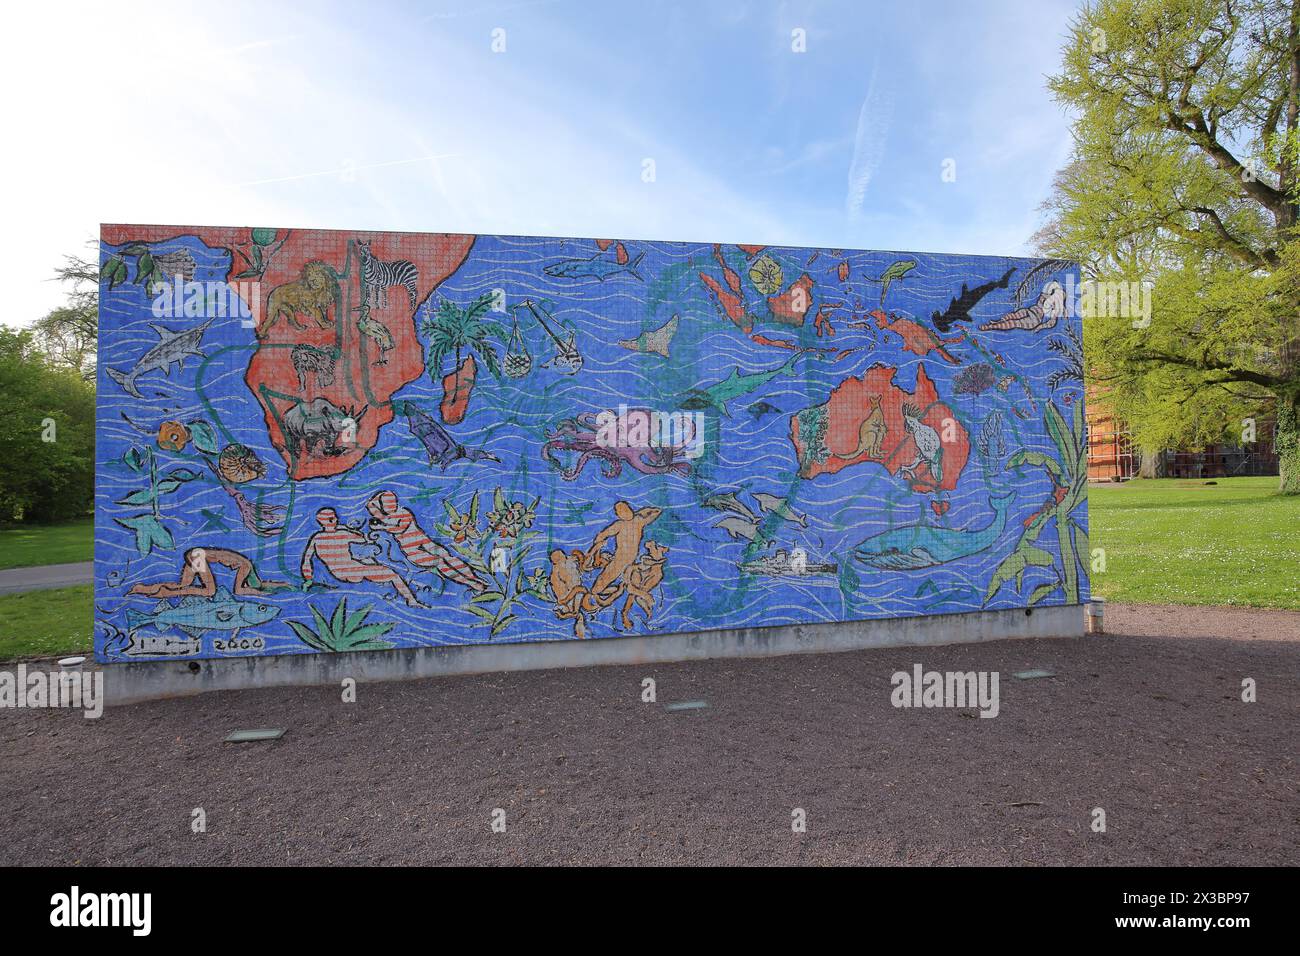 Sculpture Living Planet Square, World Map of Life, by Stefan Szczesny 2000, street art, wall mosaic, graffiti, South Africa, Australia, map, water Stock Photo